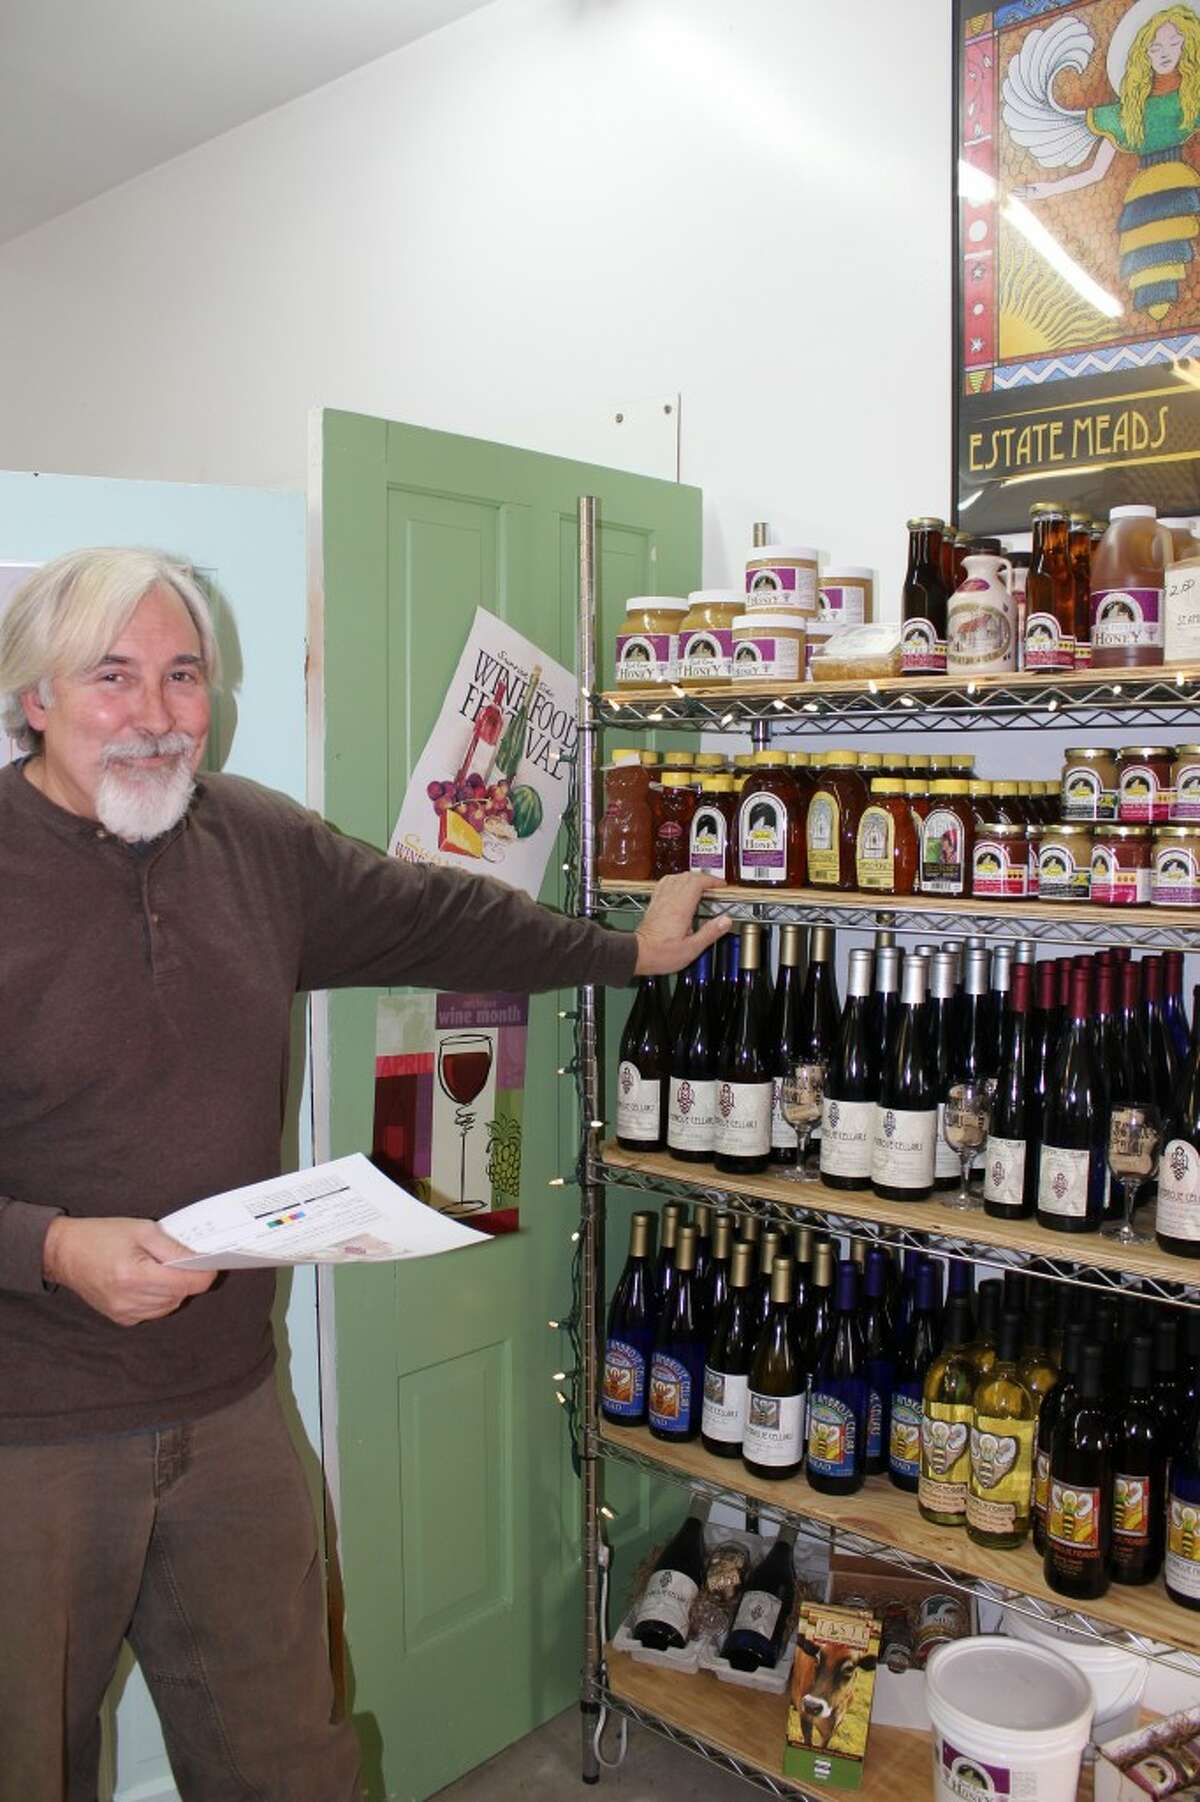 St Ambrose: Doug Coster, sales manager for St. Ambrose Cellars, said the market for mead, in Benzie and beyond, is doing quite well. So well, in fact, that they may soon begin distribution on the East Coast. St. Ambrose, which started marketing mead 2 years ago, makes traditional meads from honey and water, as well as meads with natural fruit flavors added. Acoustic Mead, a meadery in Lake Ann, creates meads of a different type; carbonated meads with a lower alcoholic content that are more “quaffable”, according to Acoustic owner Bruce Grossman. (Photo by Colin Merry)